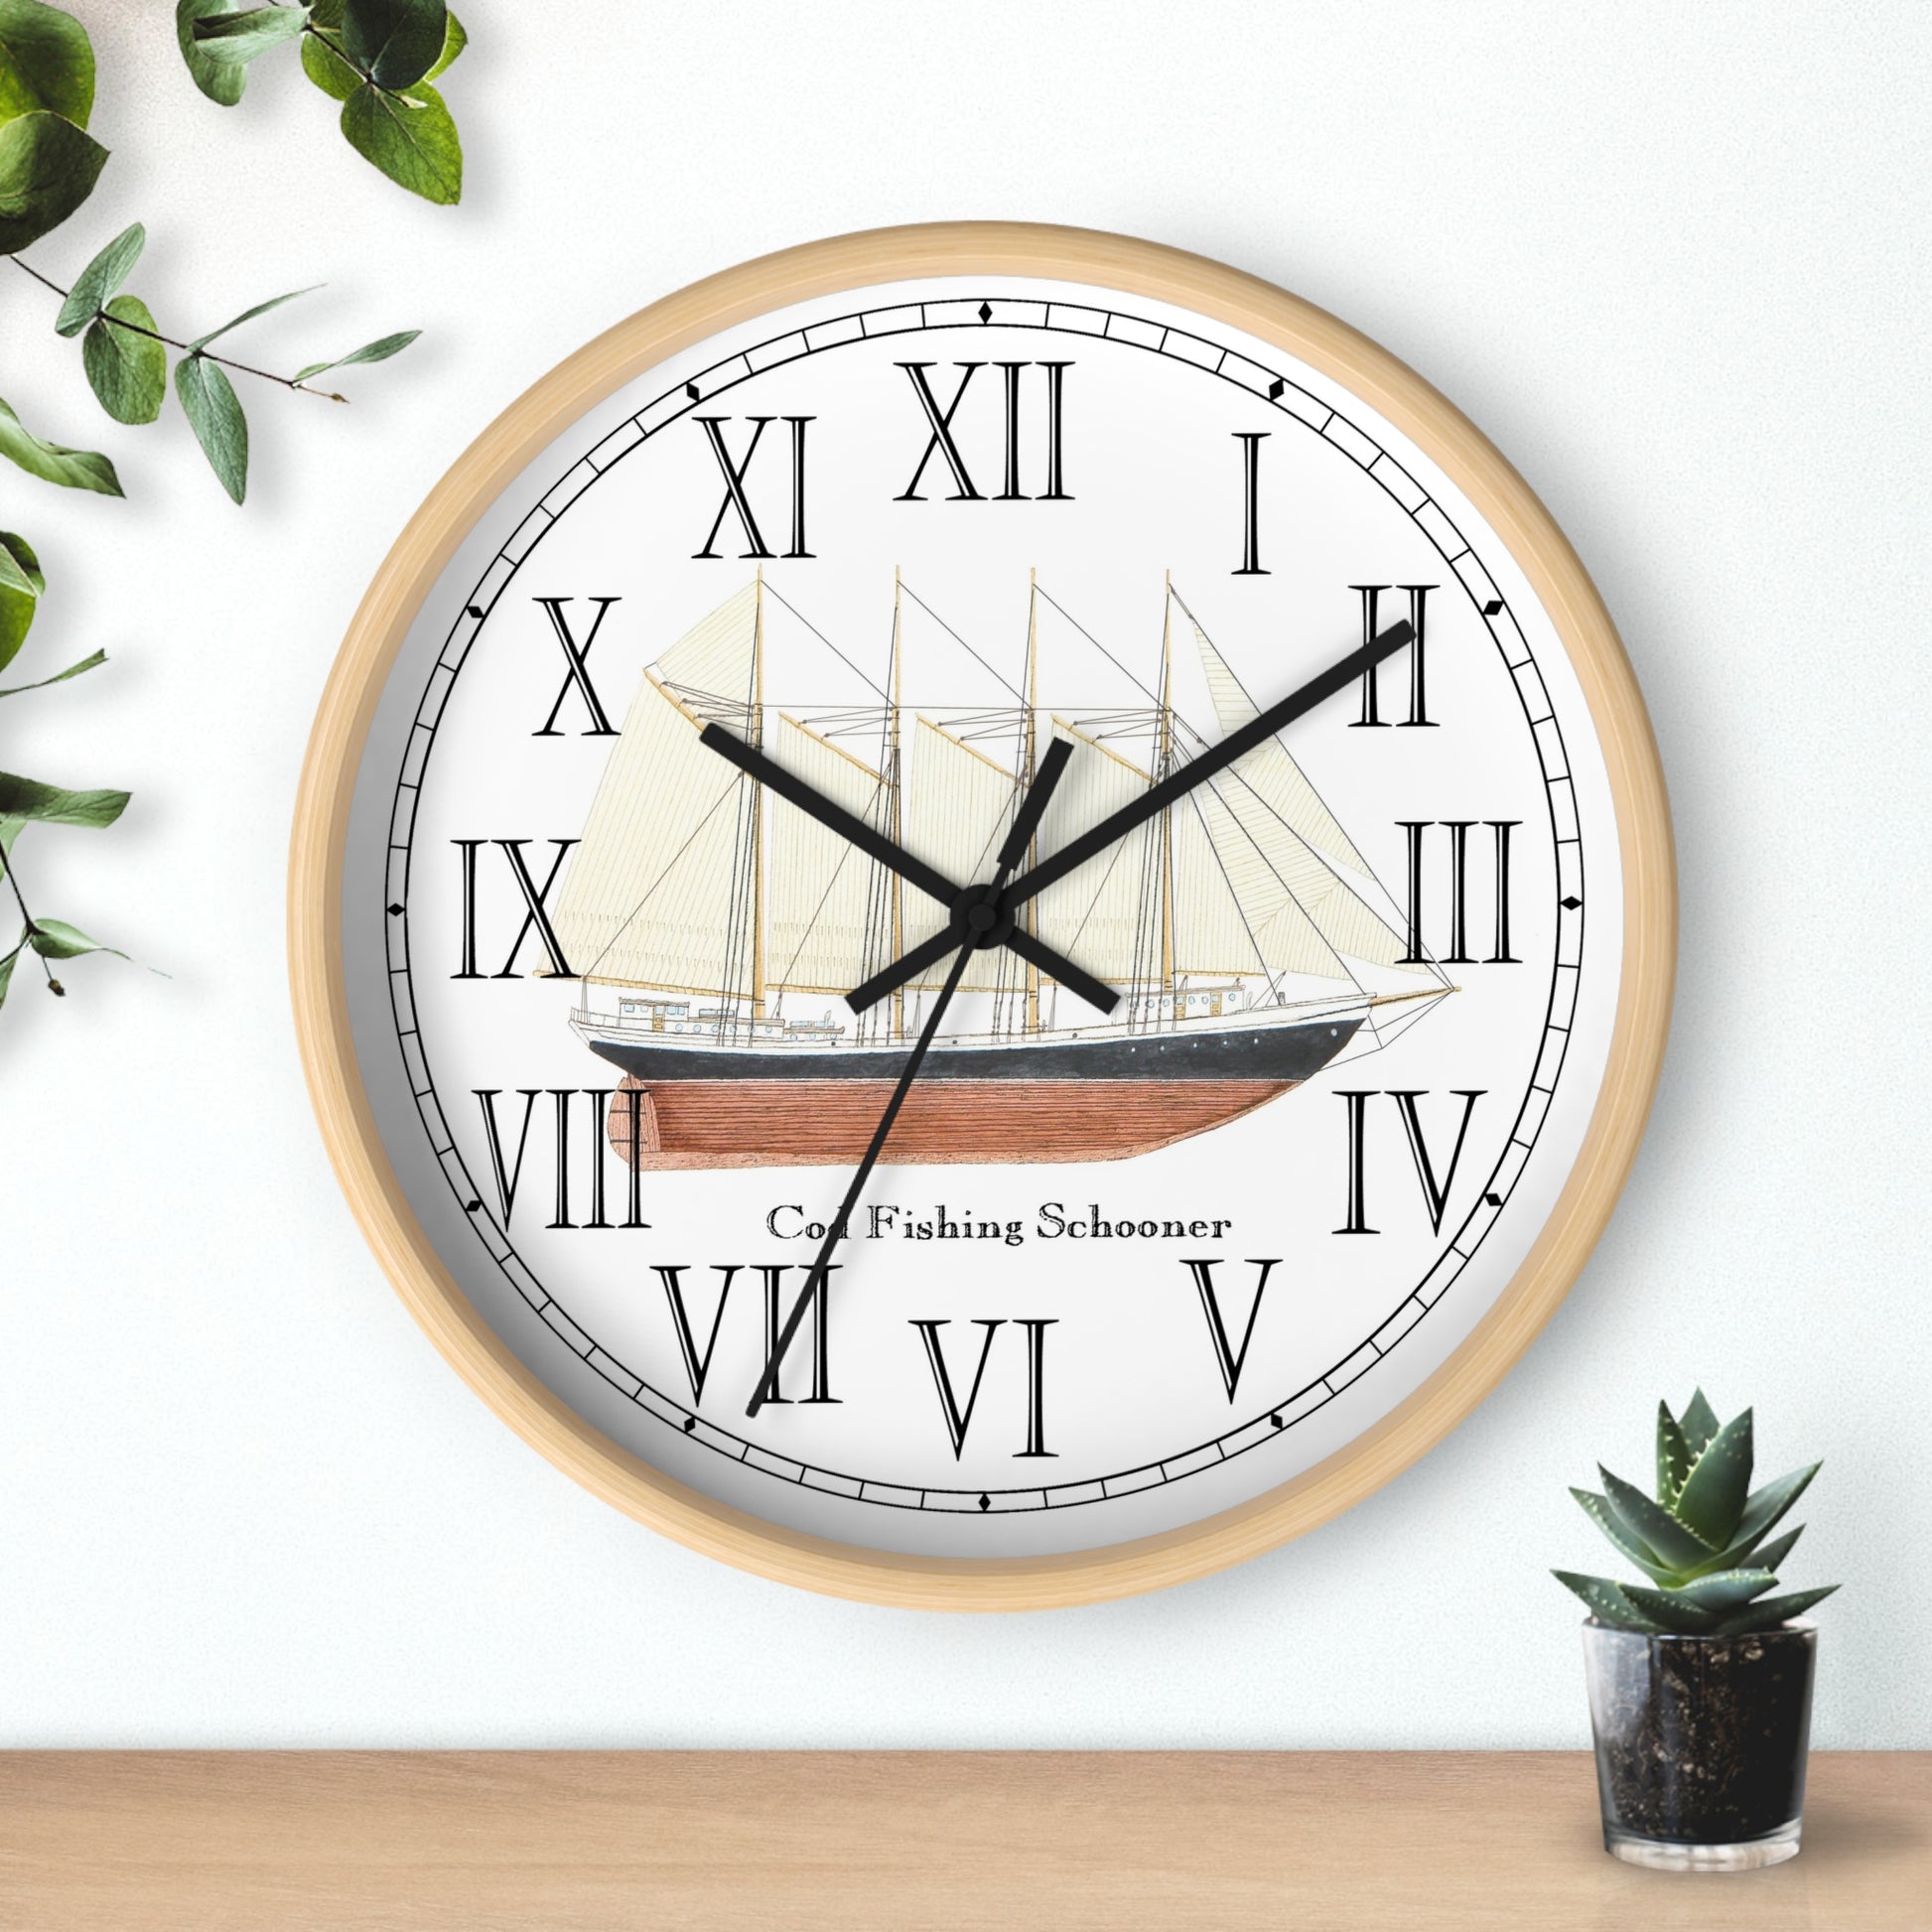 The Atlantic Pearl Cod Fishing Schooner Roman Numeral Clock will ad a classic touch to any room.